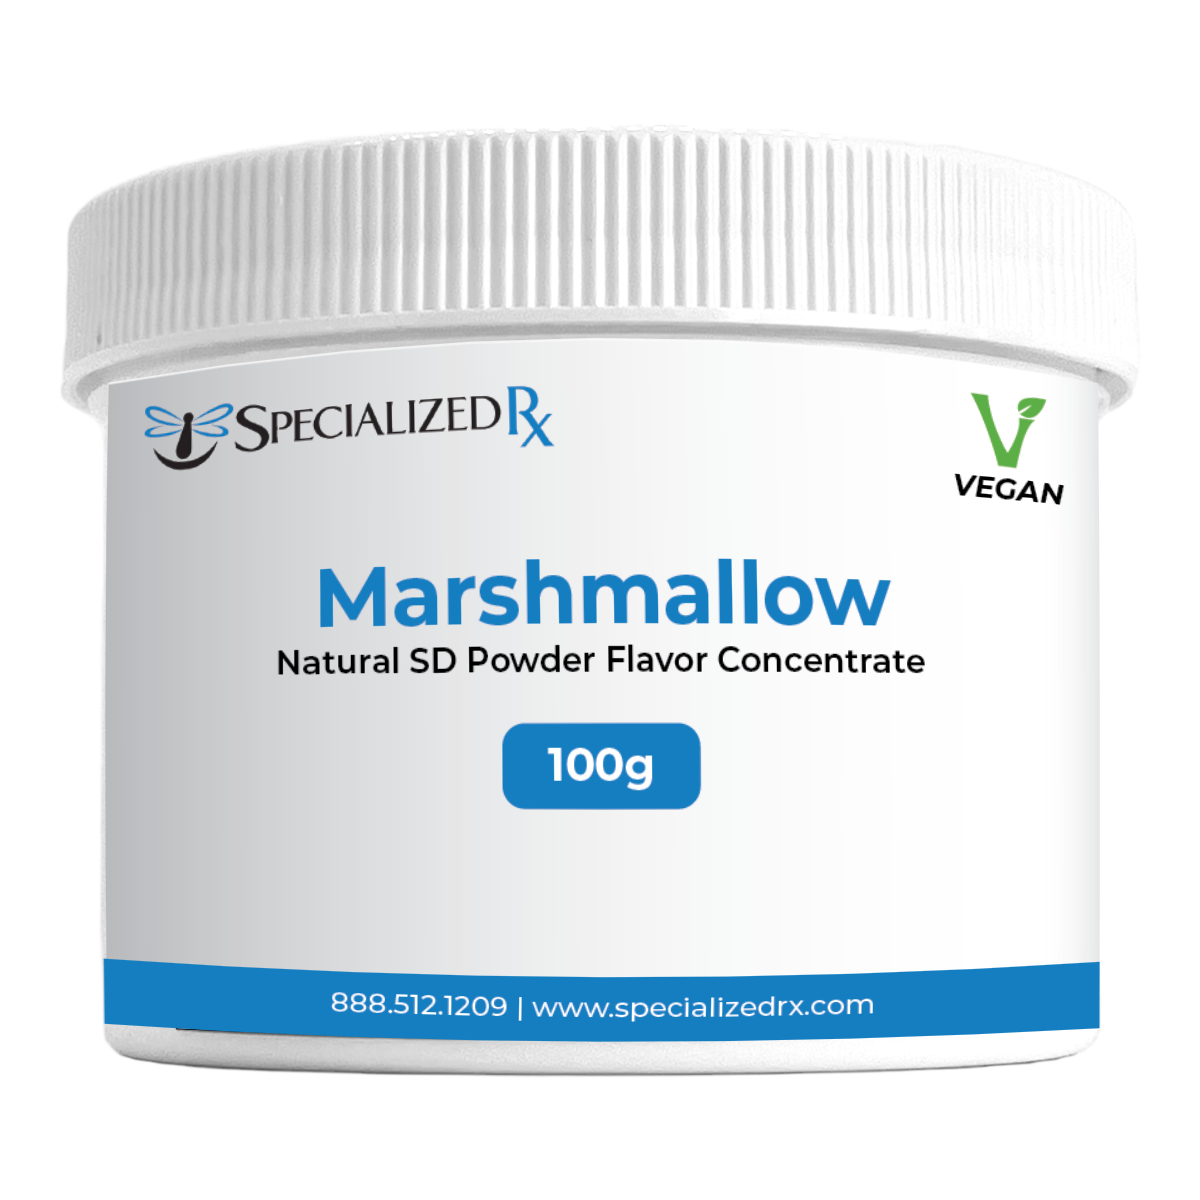 Marshmallow Natural SD Powder Flavor Concentrate